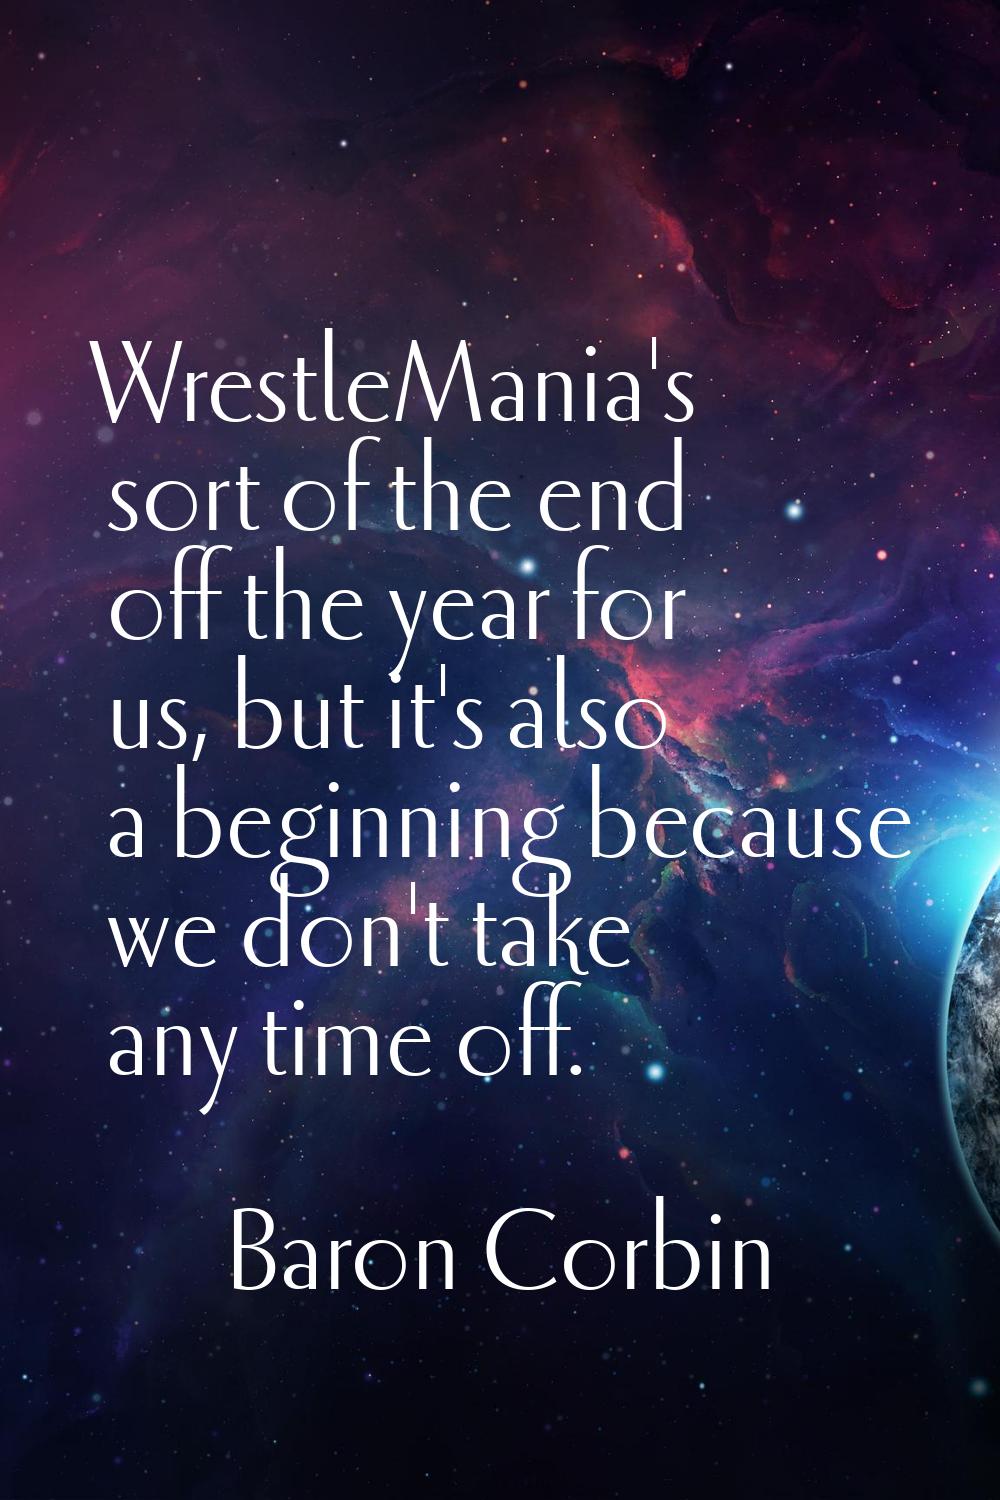 WrestleMania's sort of the end off the year for us, but it's also a beginning because we don't take